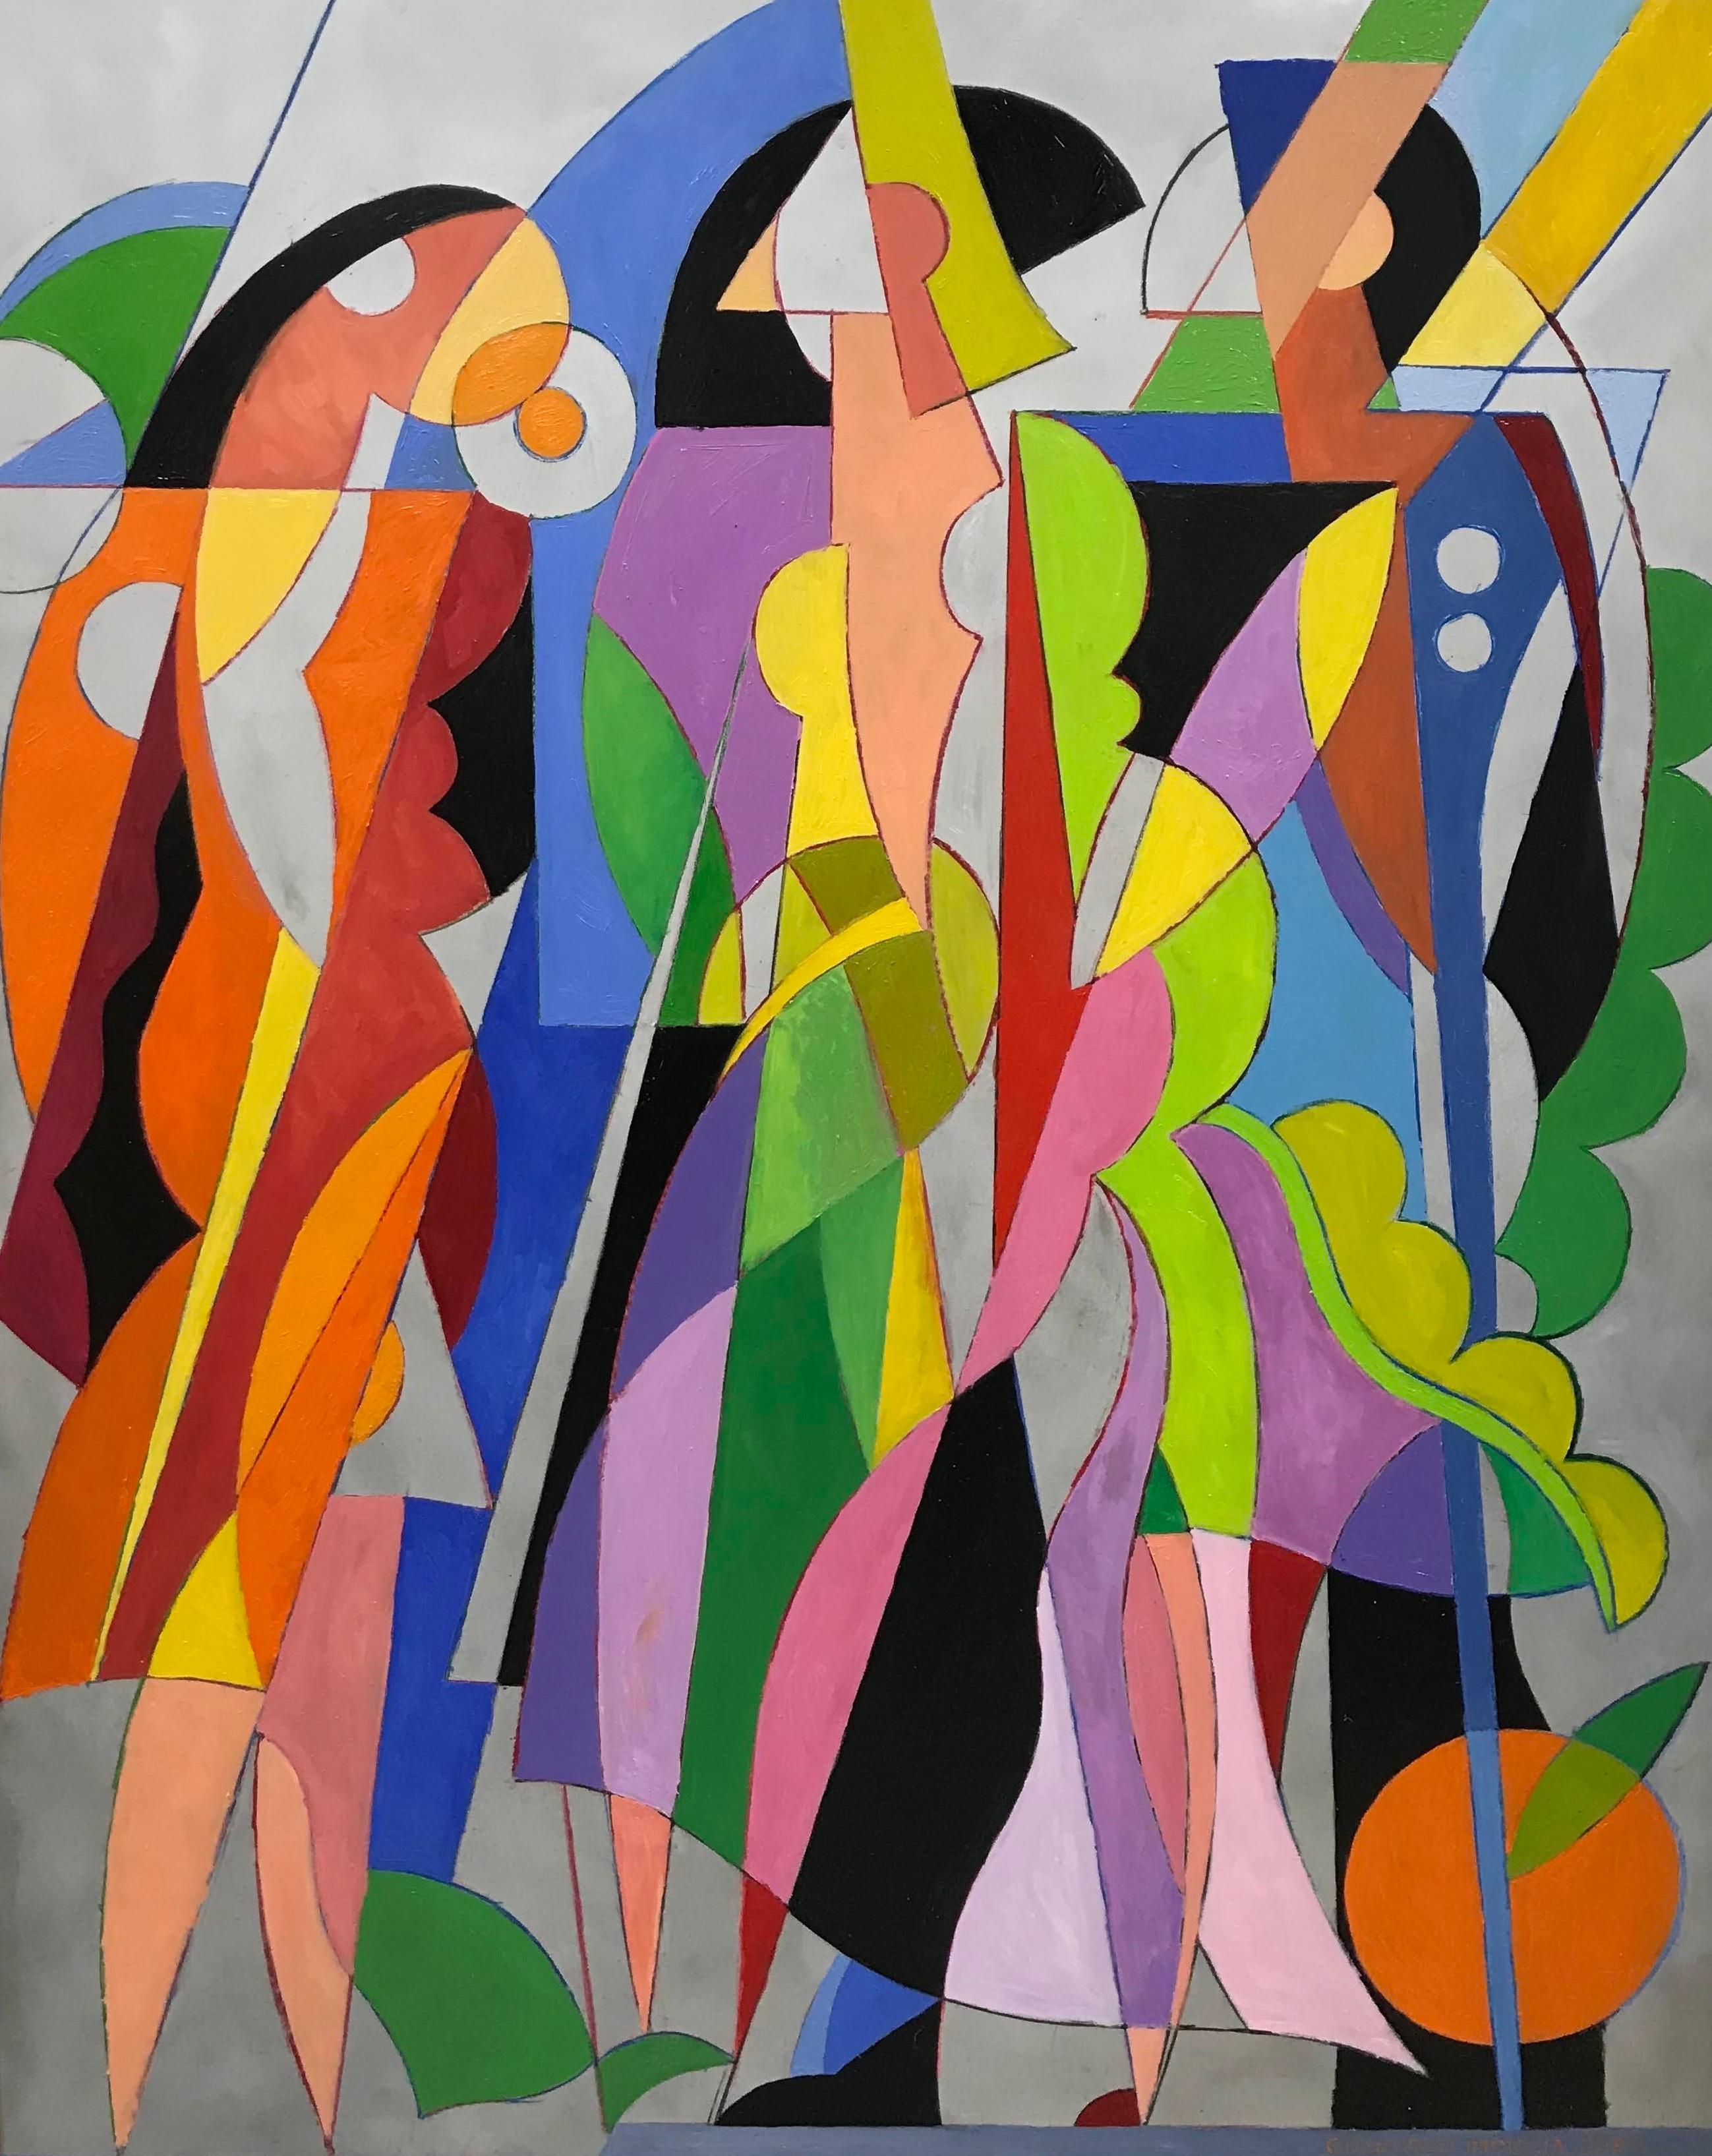 Geometric, cubist, figurative contemporary oil painting, "Interrupted Games"  